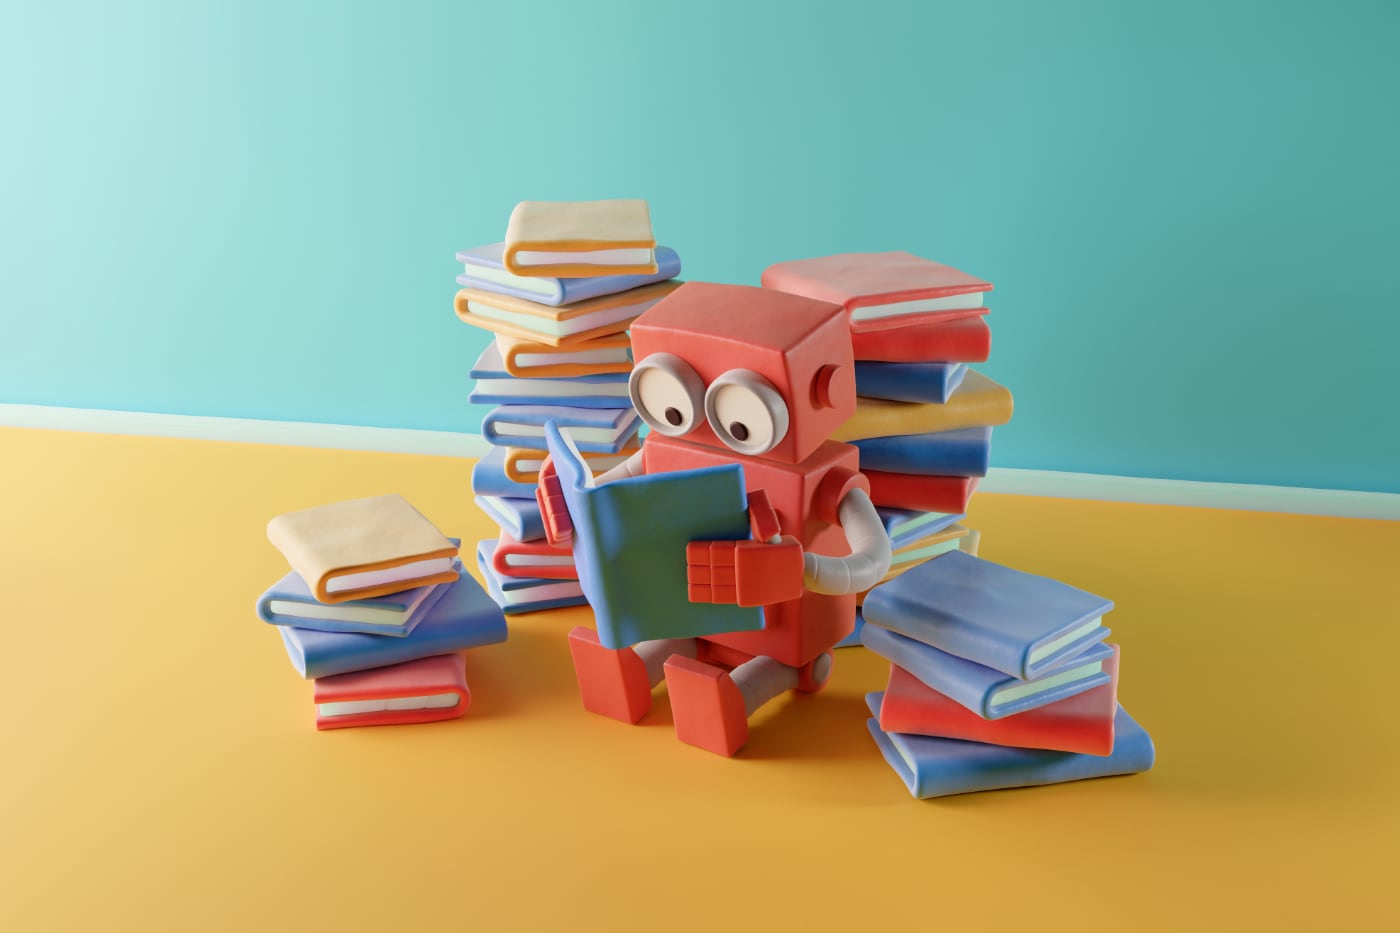 Clay robot reading a book illustrates the question: How smart is artificial intelligence getting?